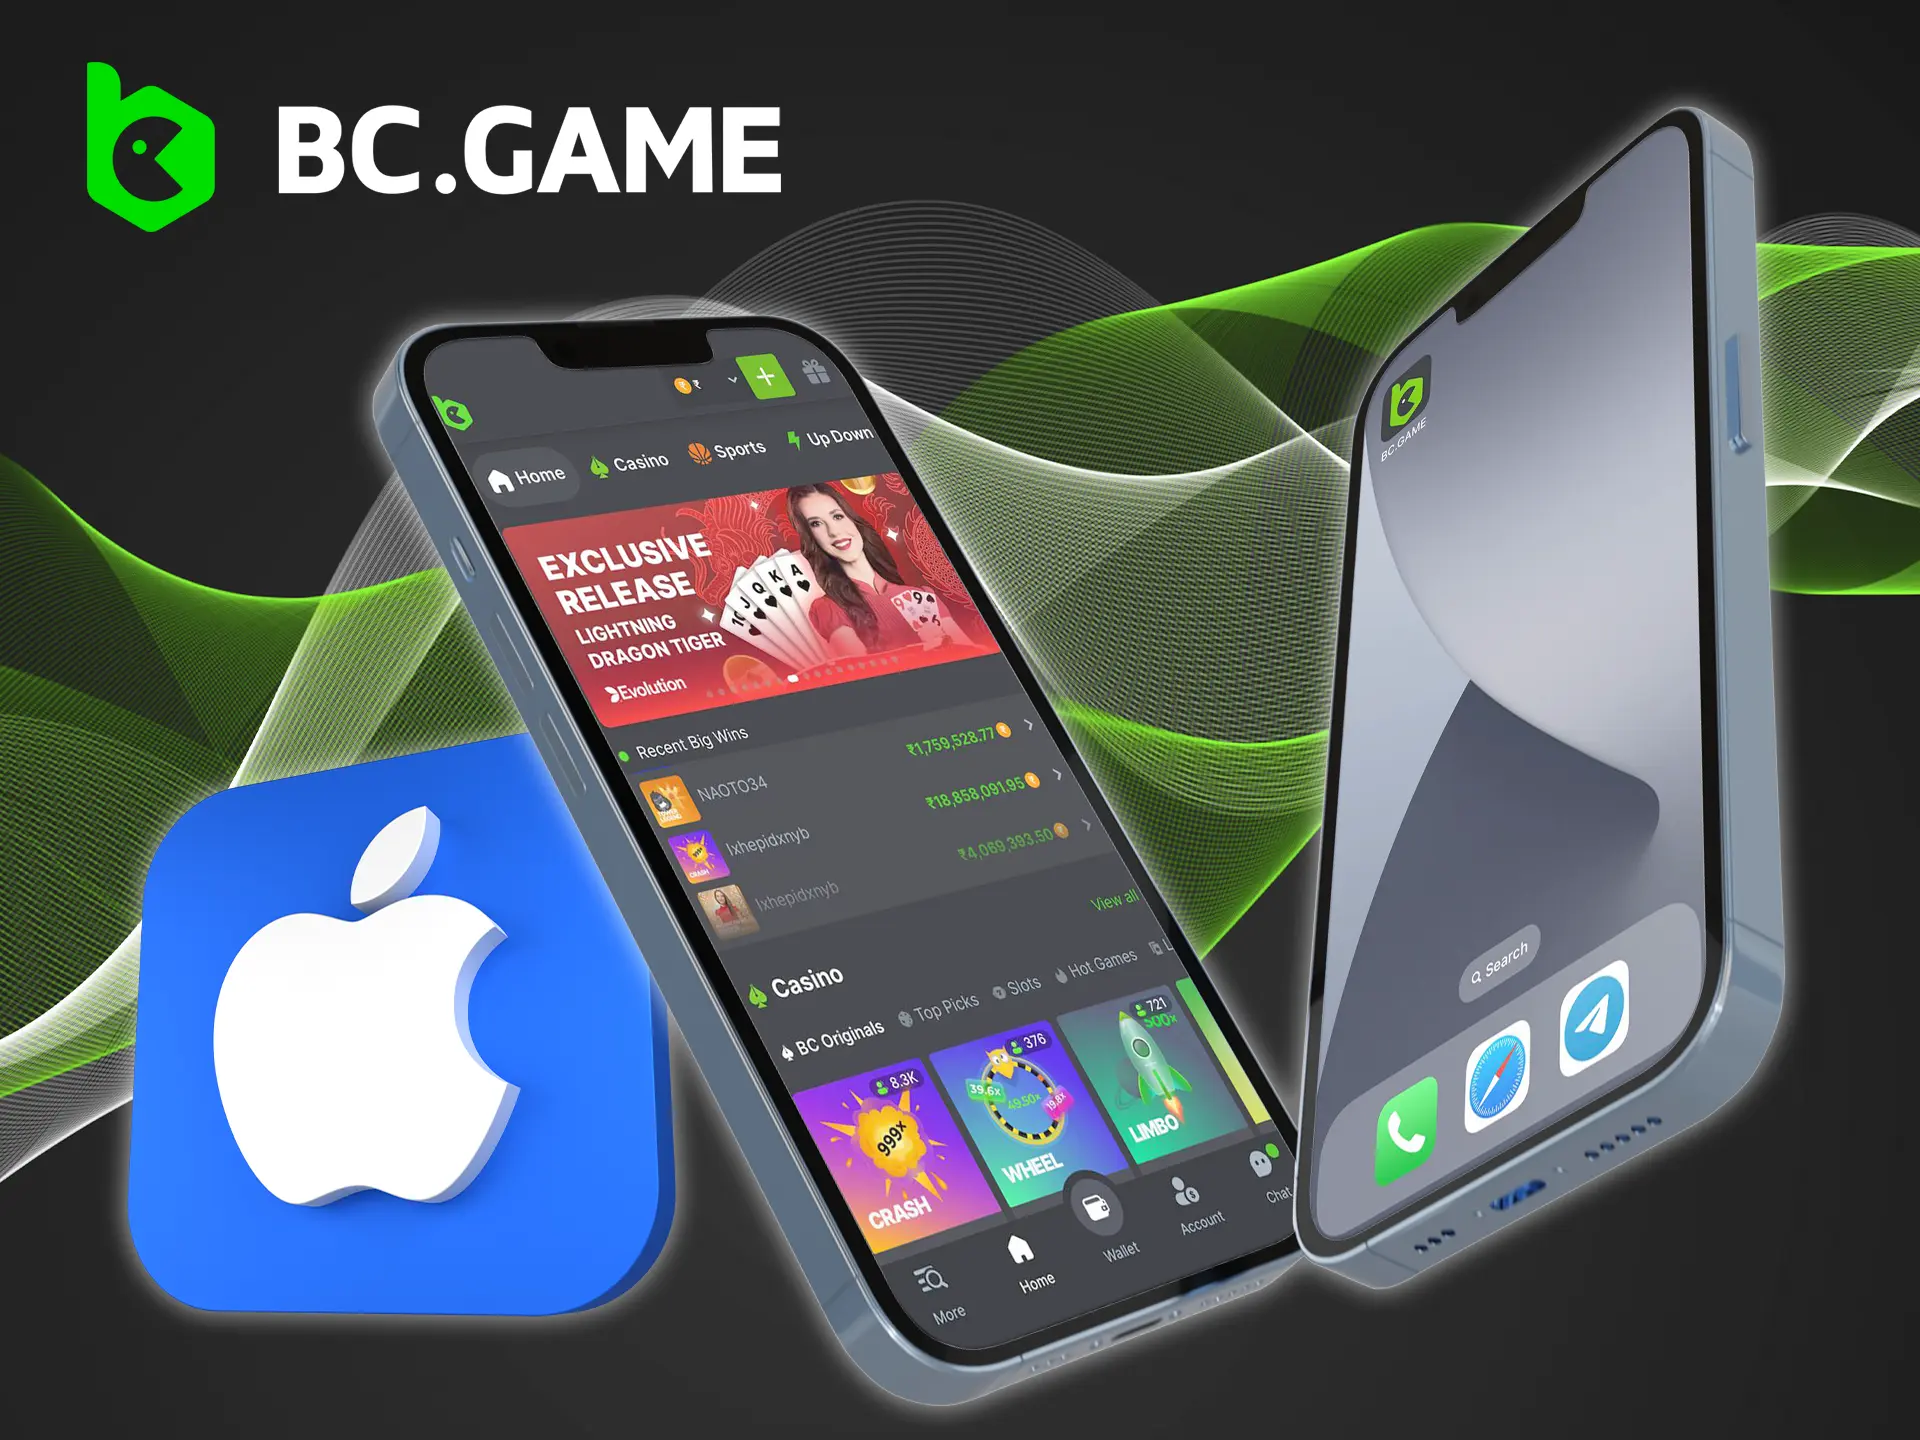 Instant installation and high performance are all about the BC Game app for iOS devices.